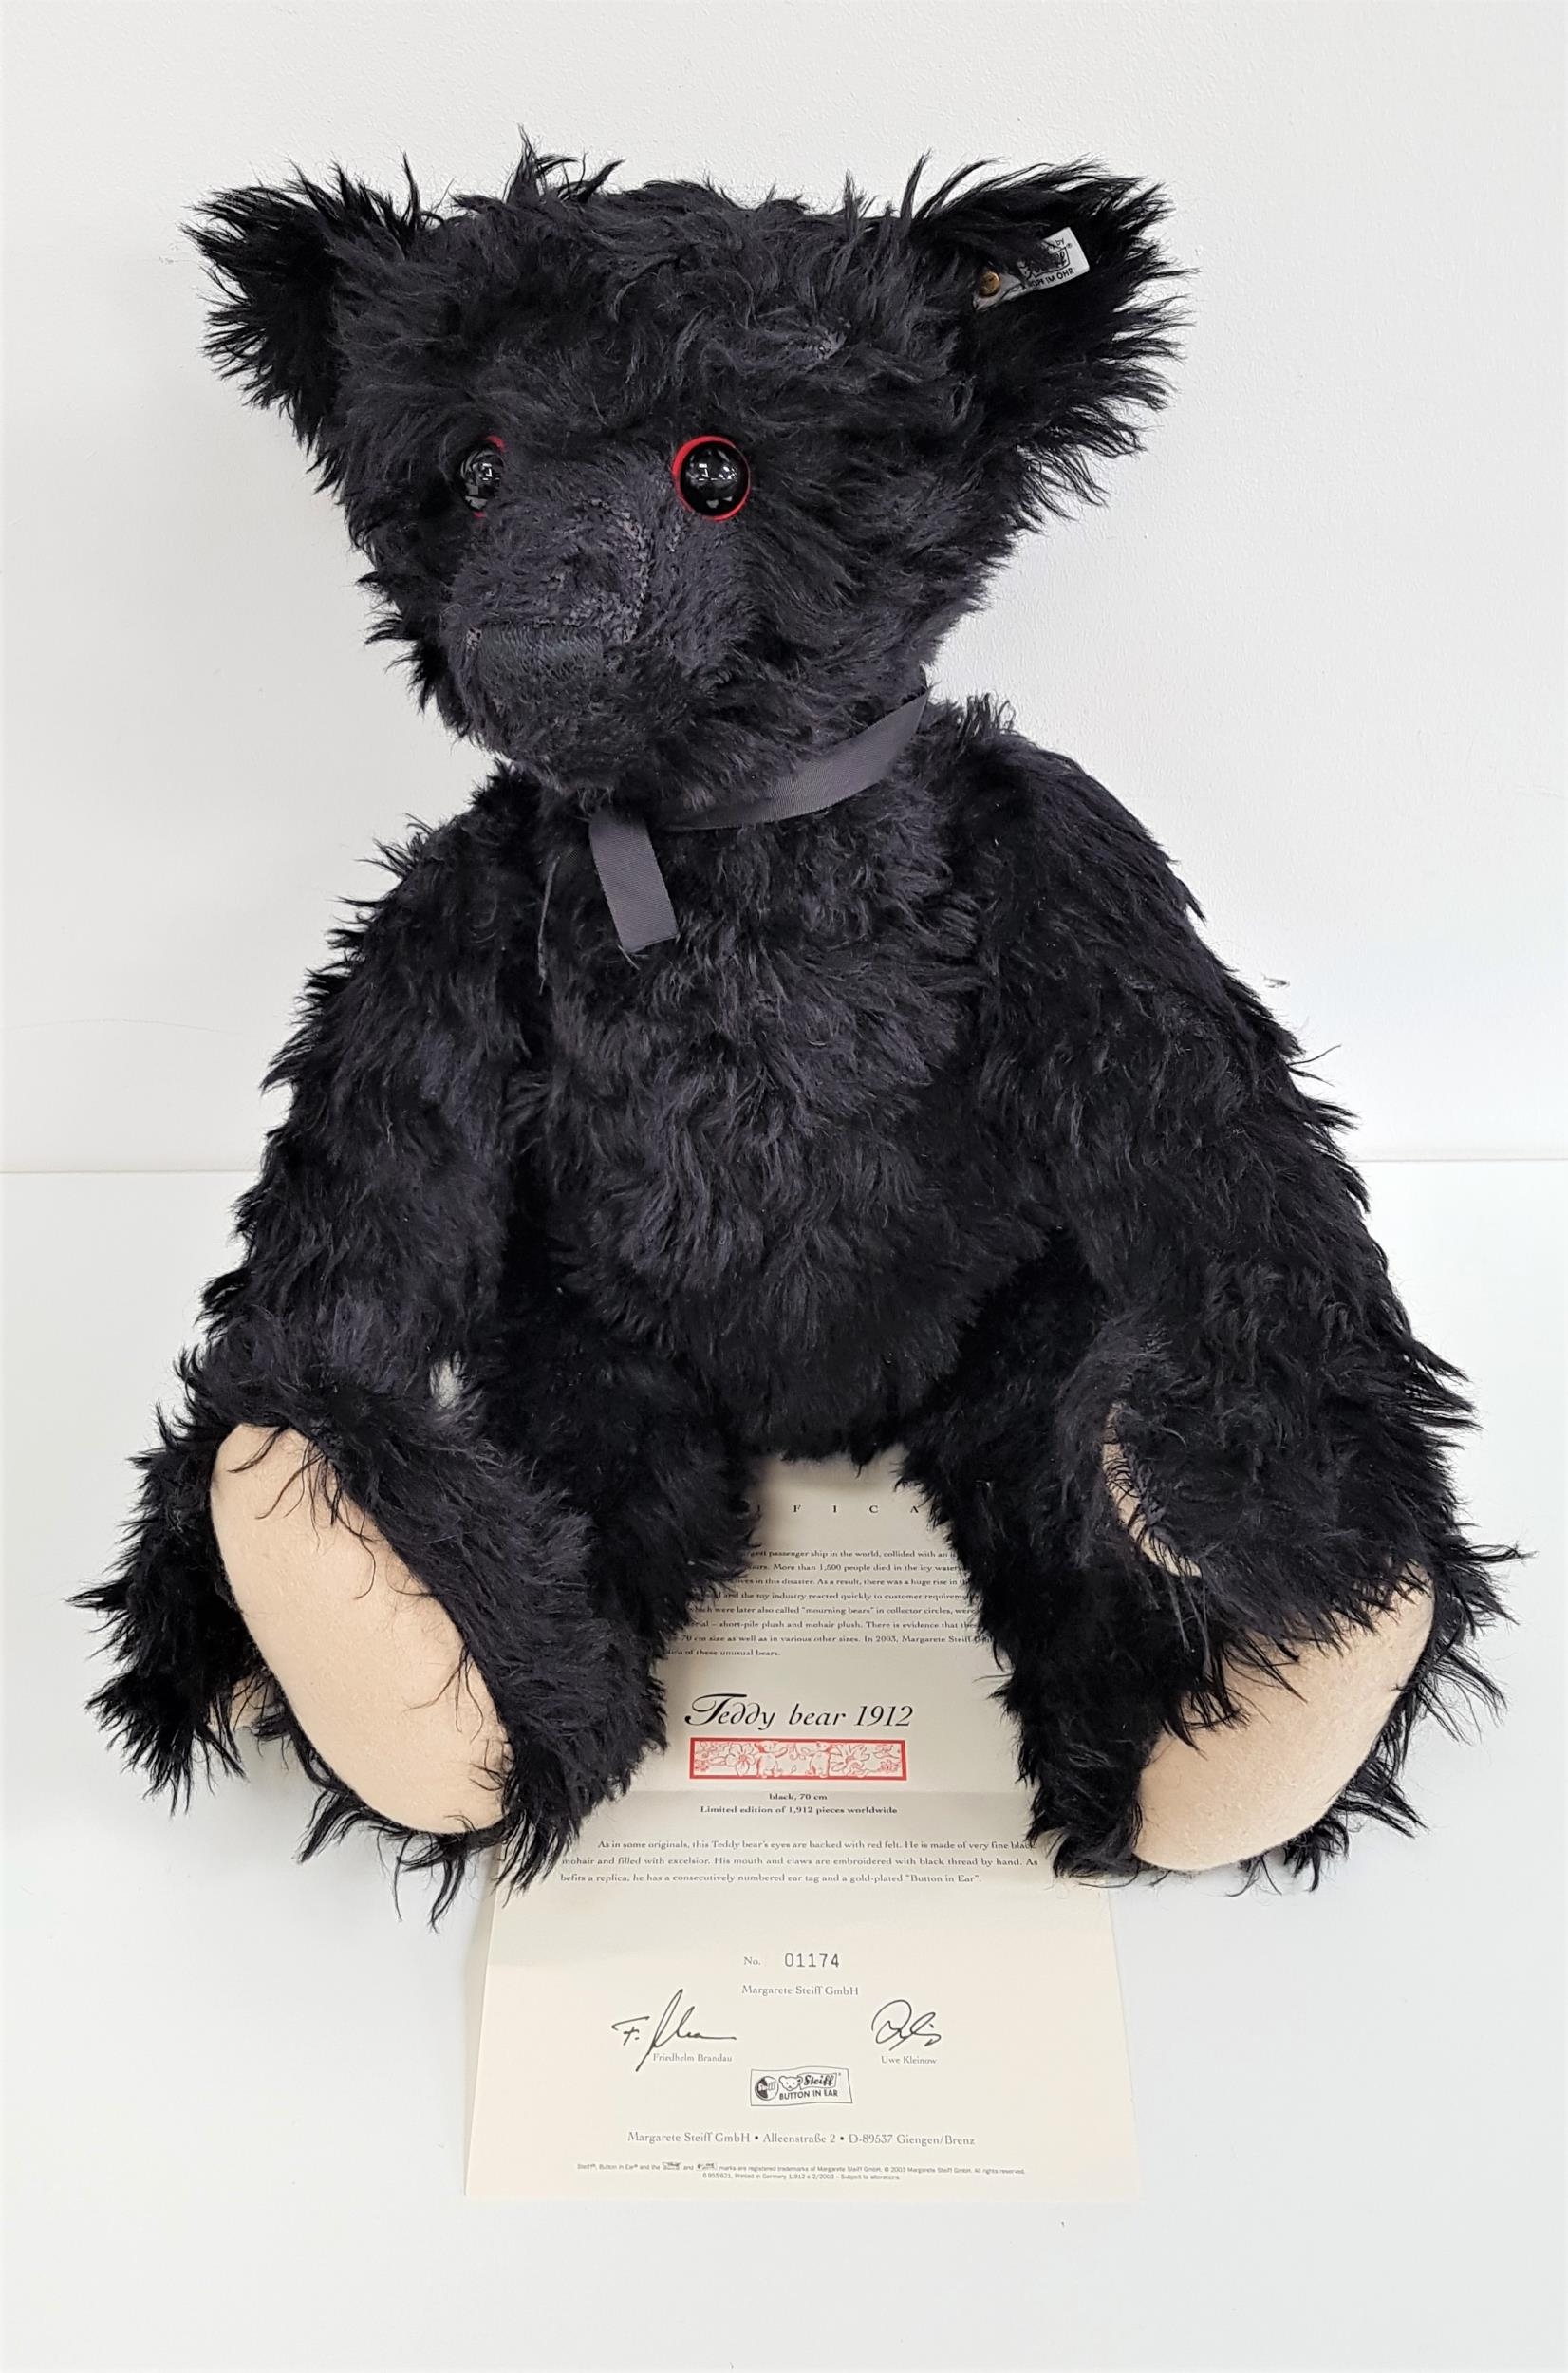 LIMITED EDITION STEIFF TEDDY BEAR 1912 REPLICA in fine black mohair with hand embroidered mouth